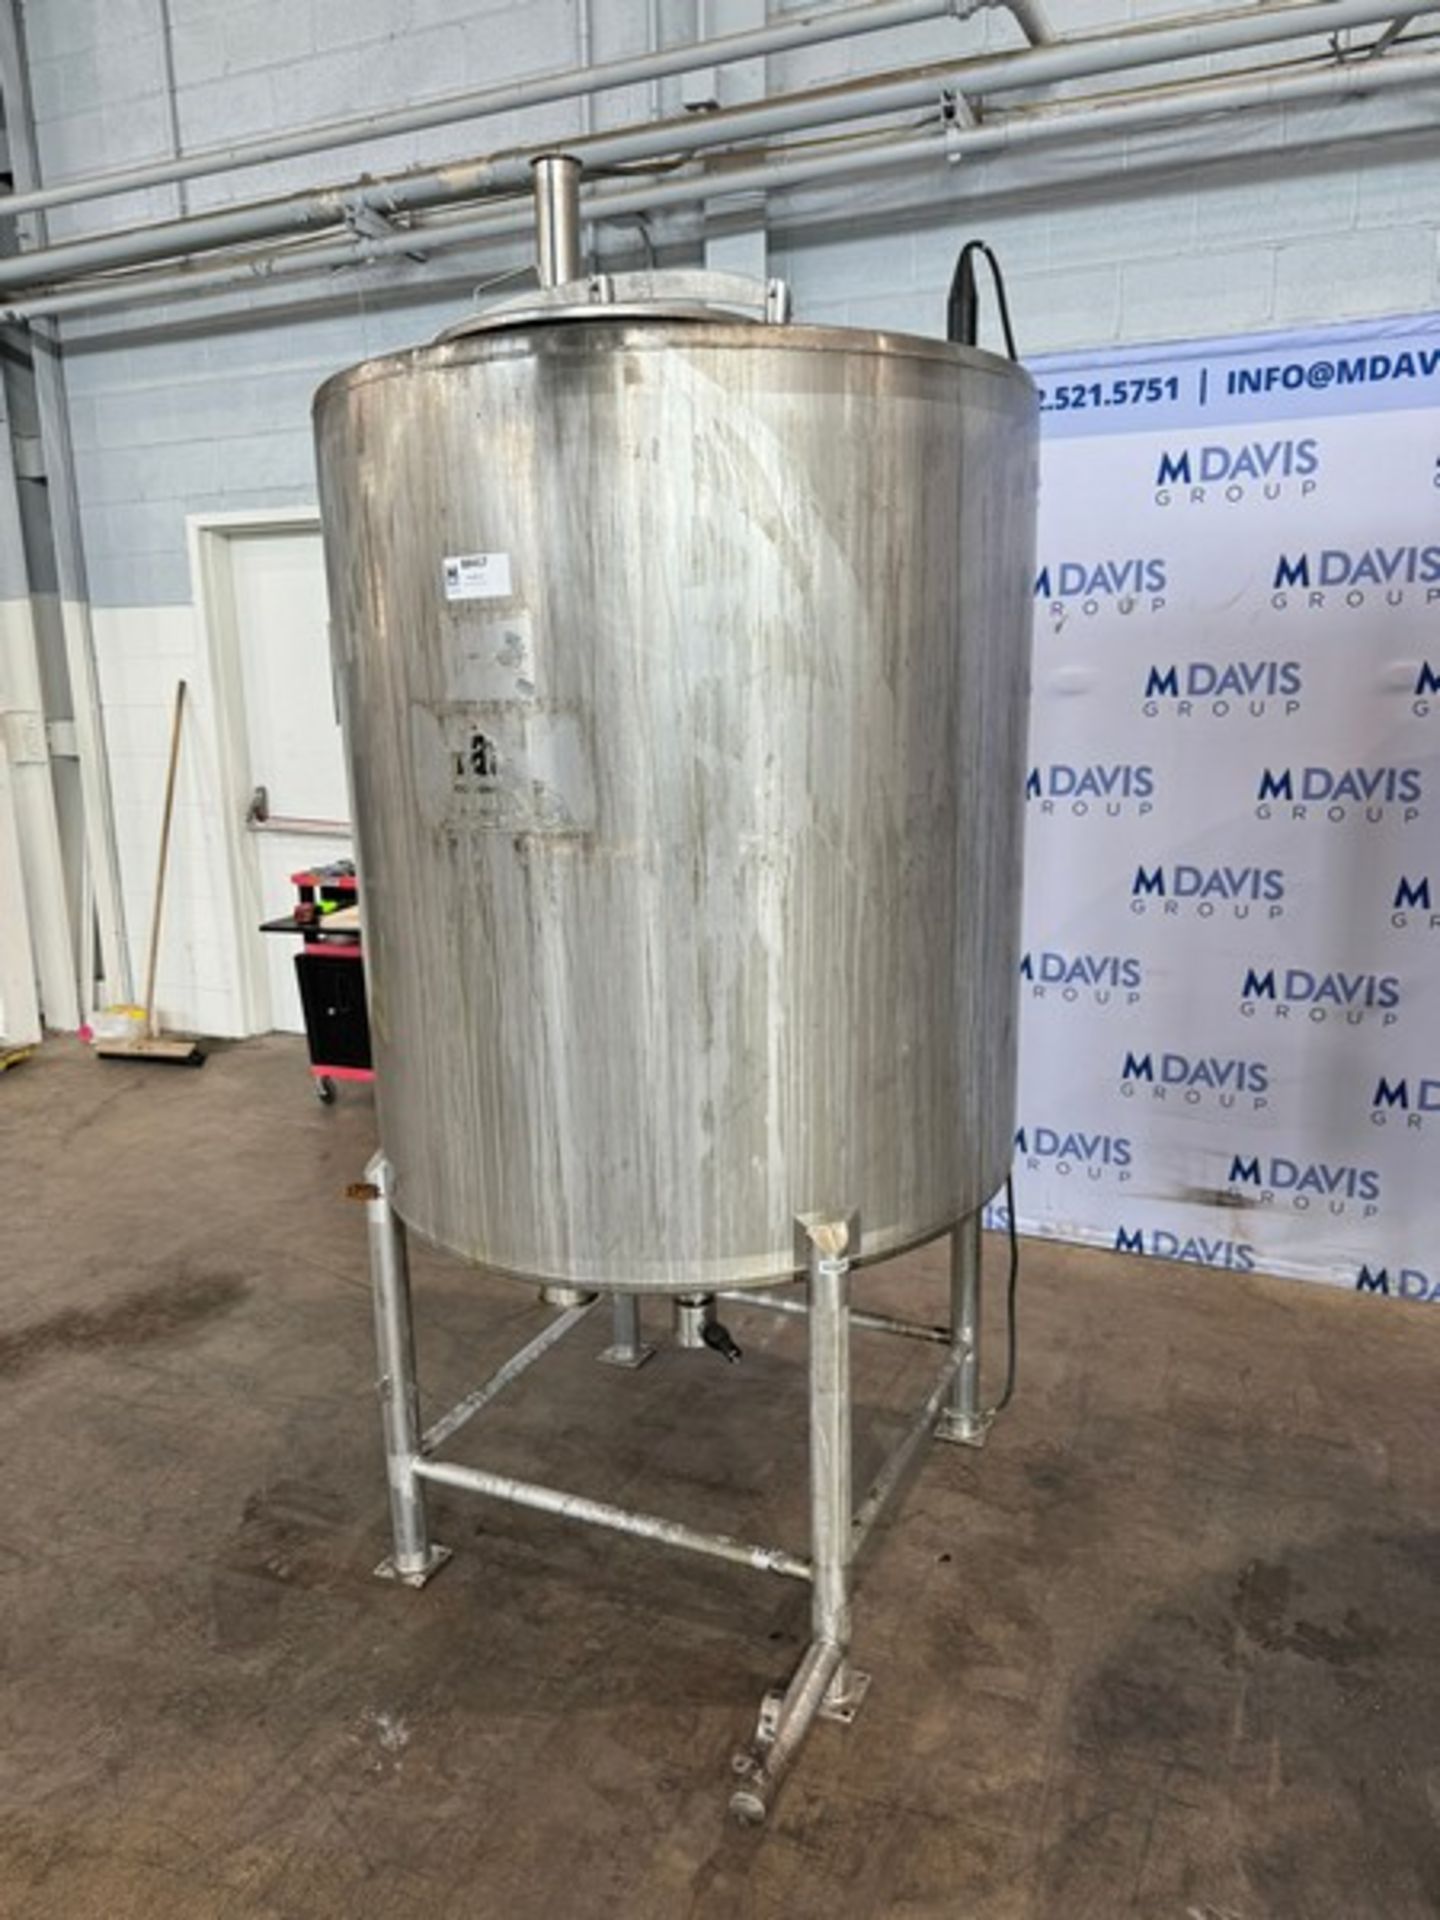 Viatec Aprox. 300 Gal. S/S Single Wall Tank, Vessel Dims.: Aprox. 47" H x 46" Dia. Mounted on S/S - Image 2 of 8